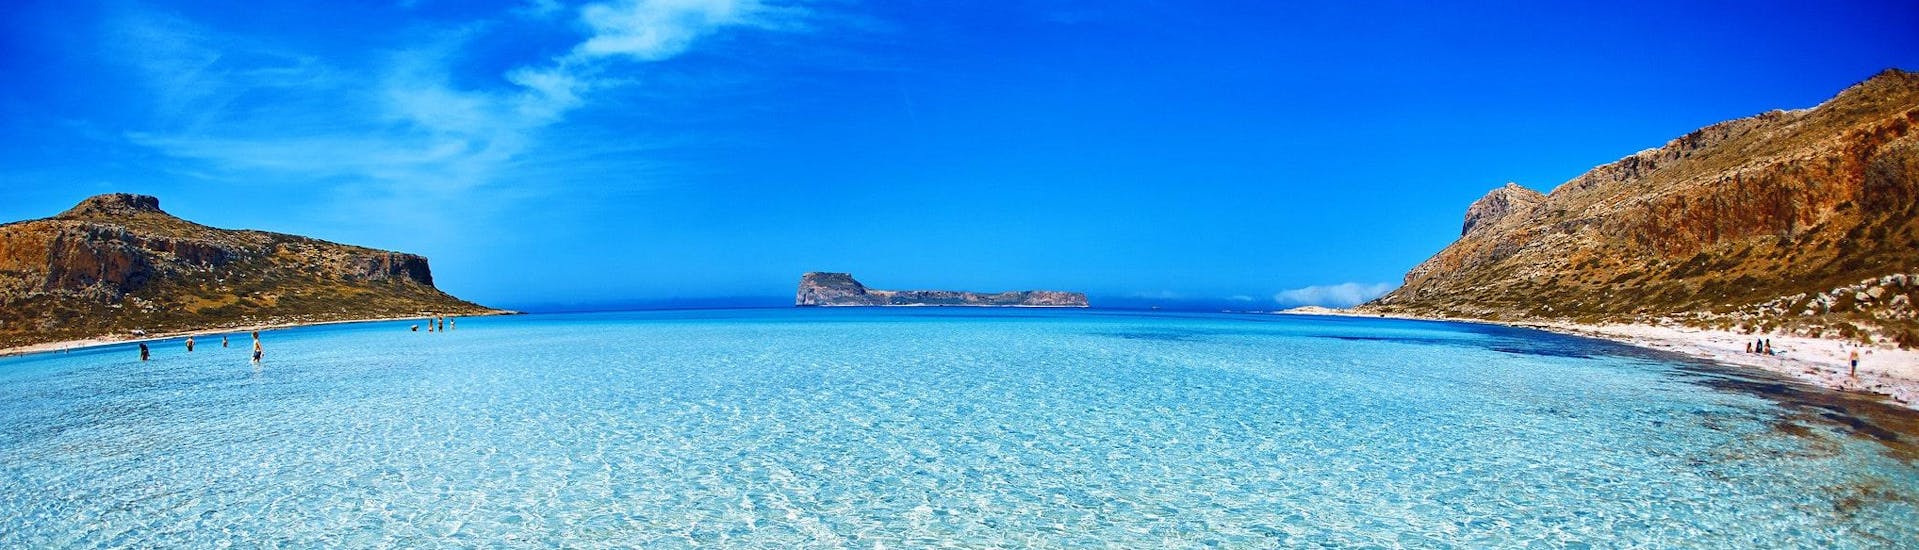 The stunning Balos Lagoon, which can be visited during many boat trips from Kissamos.